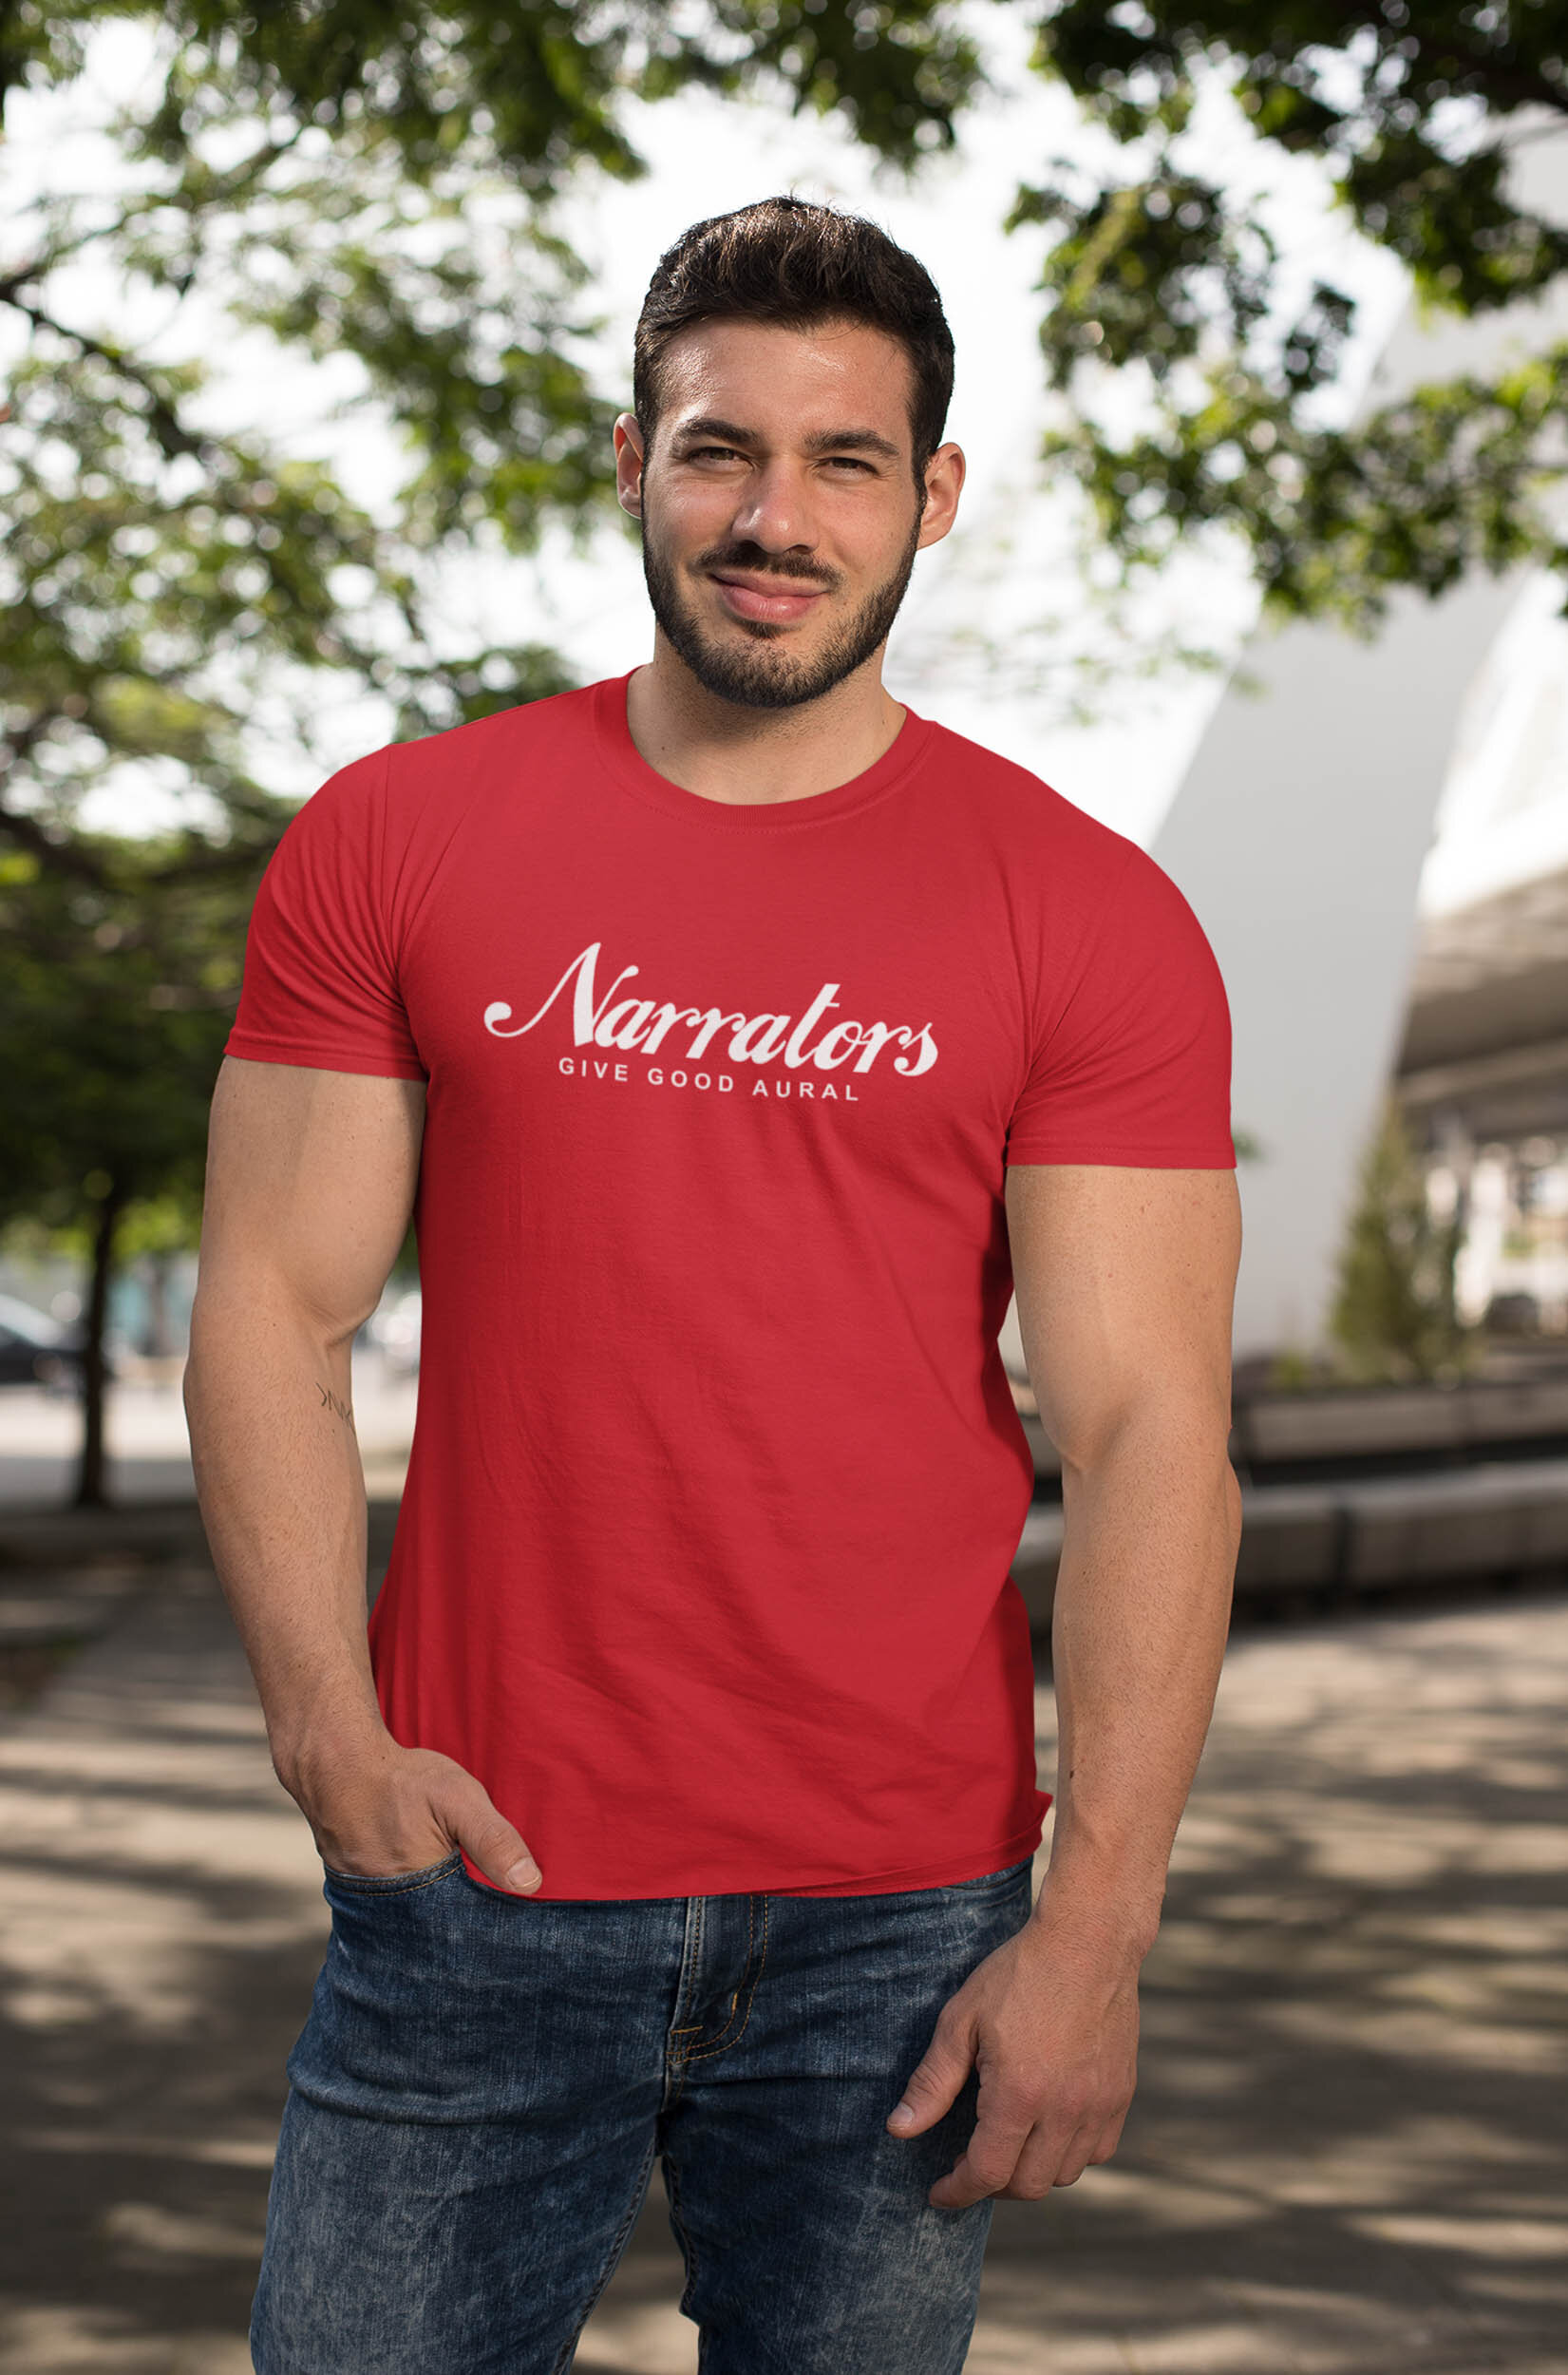 t-shirt-mockup-of-a-fitness-man-posing-in-the-street-on-a-sunny-day-28511.jpg